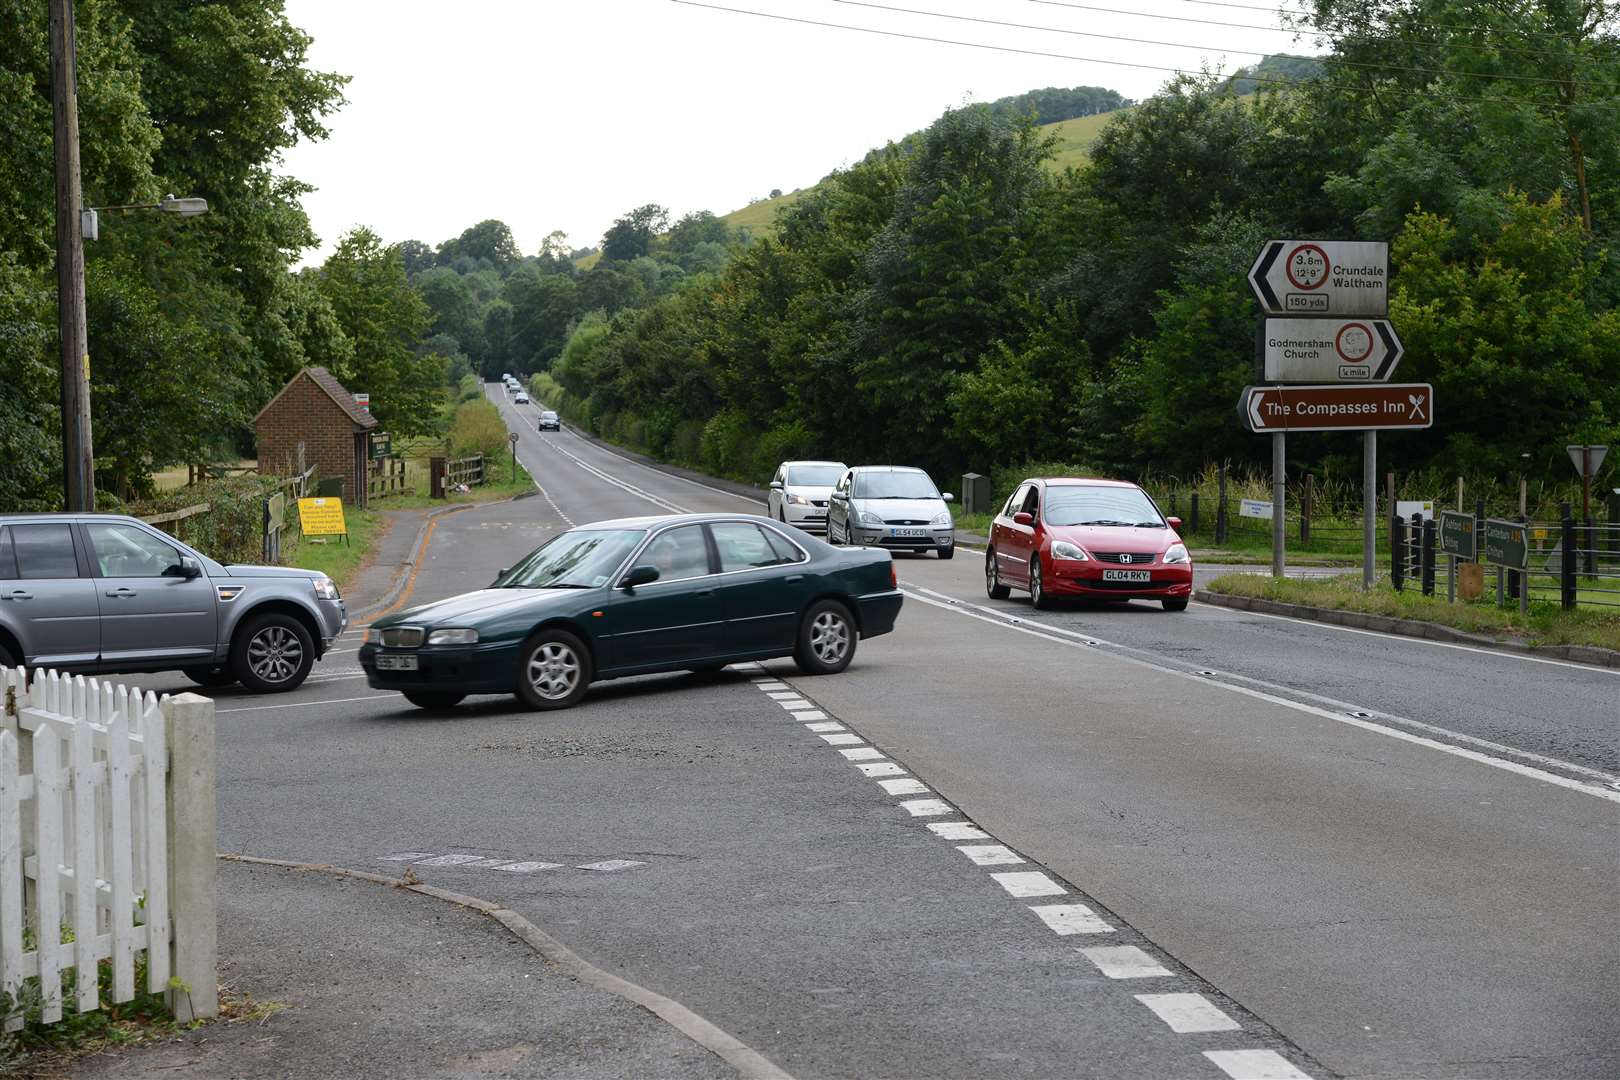 The scene of the accident on the A28